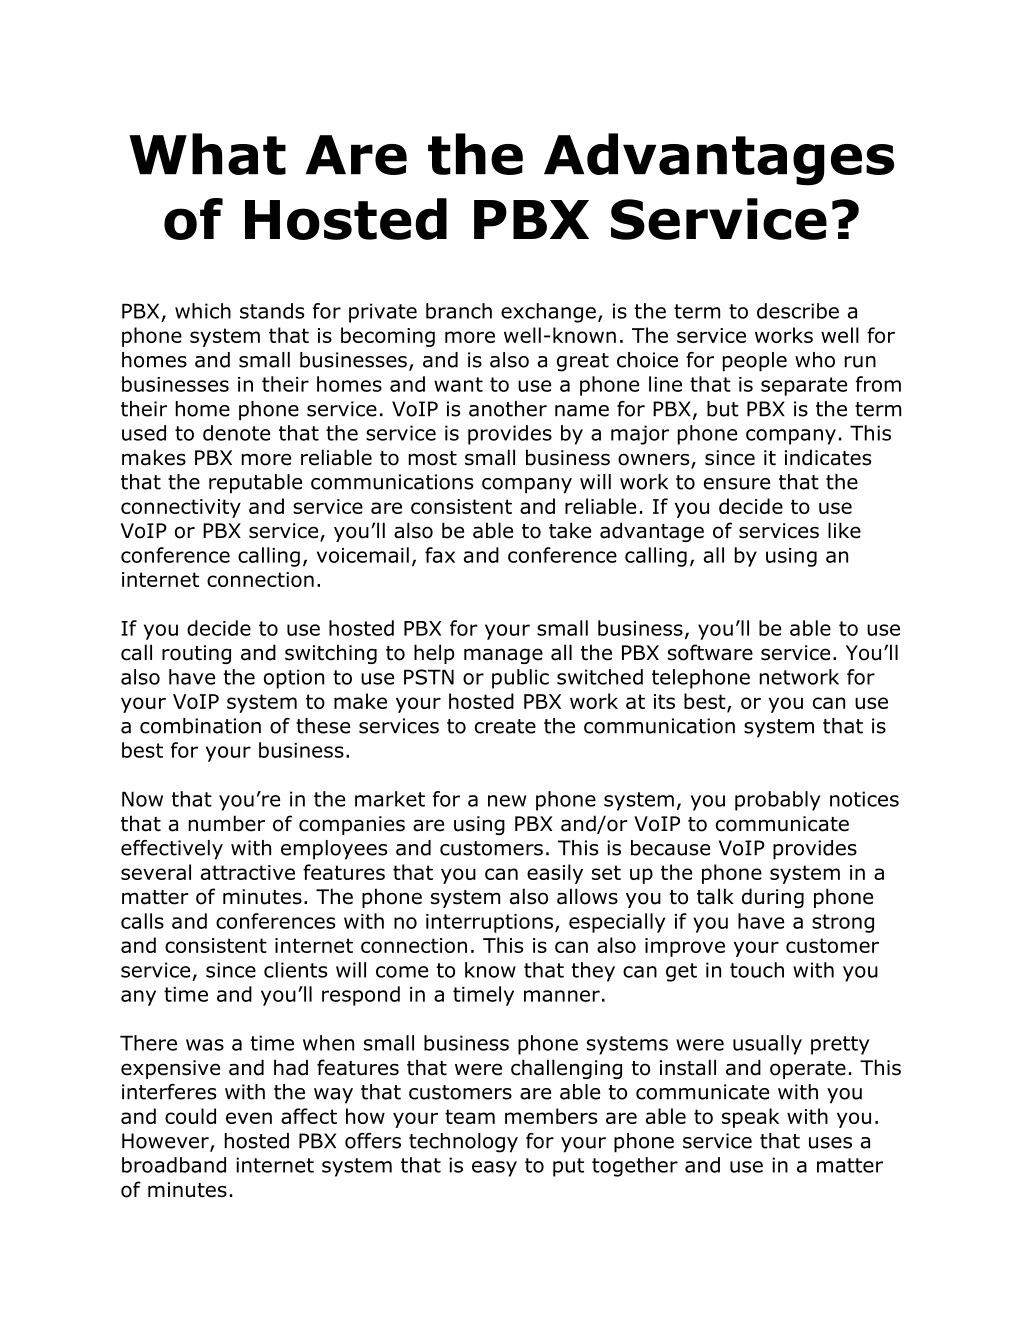 what are the advantages of hosted pbx service